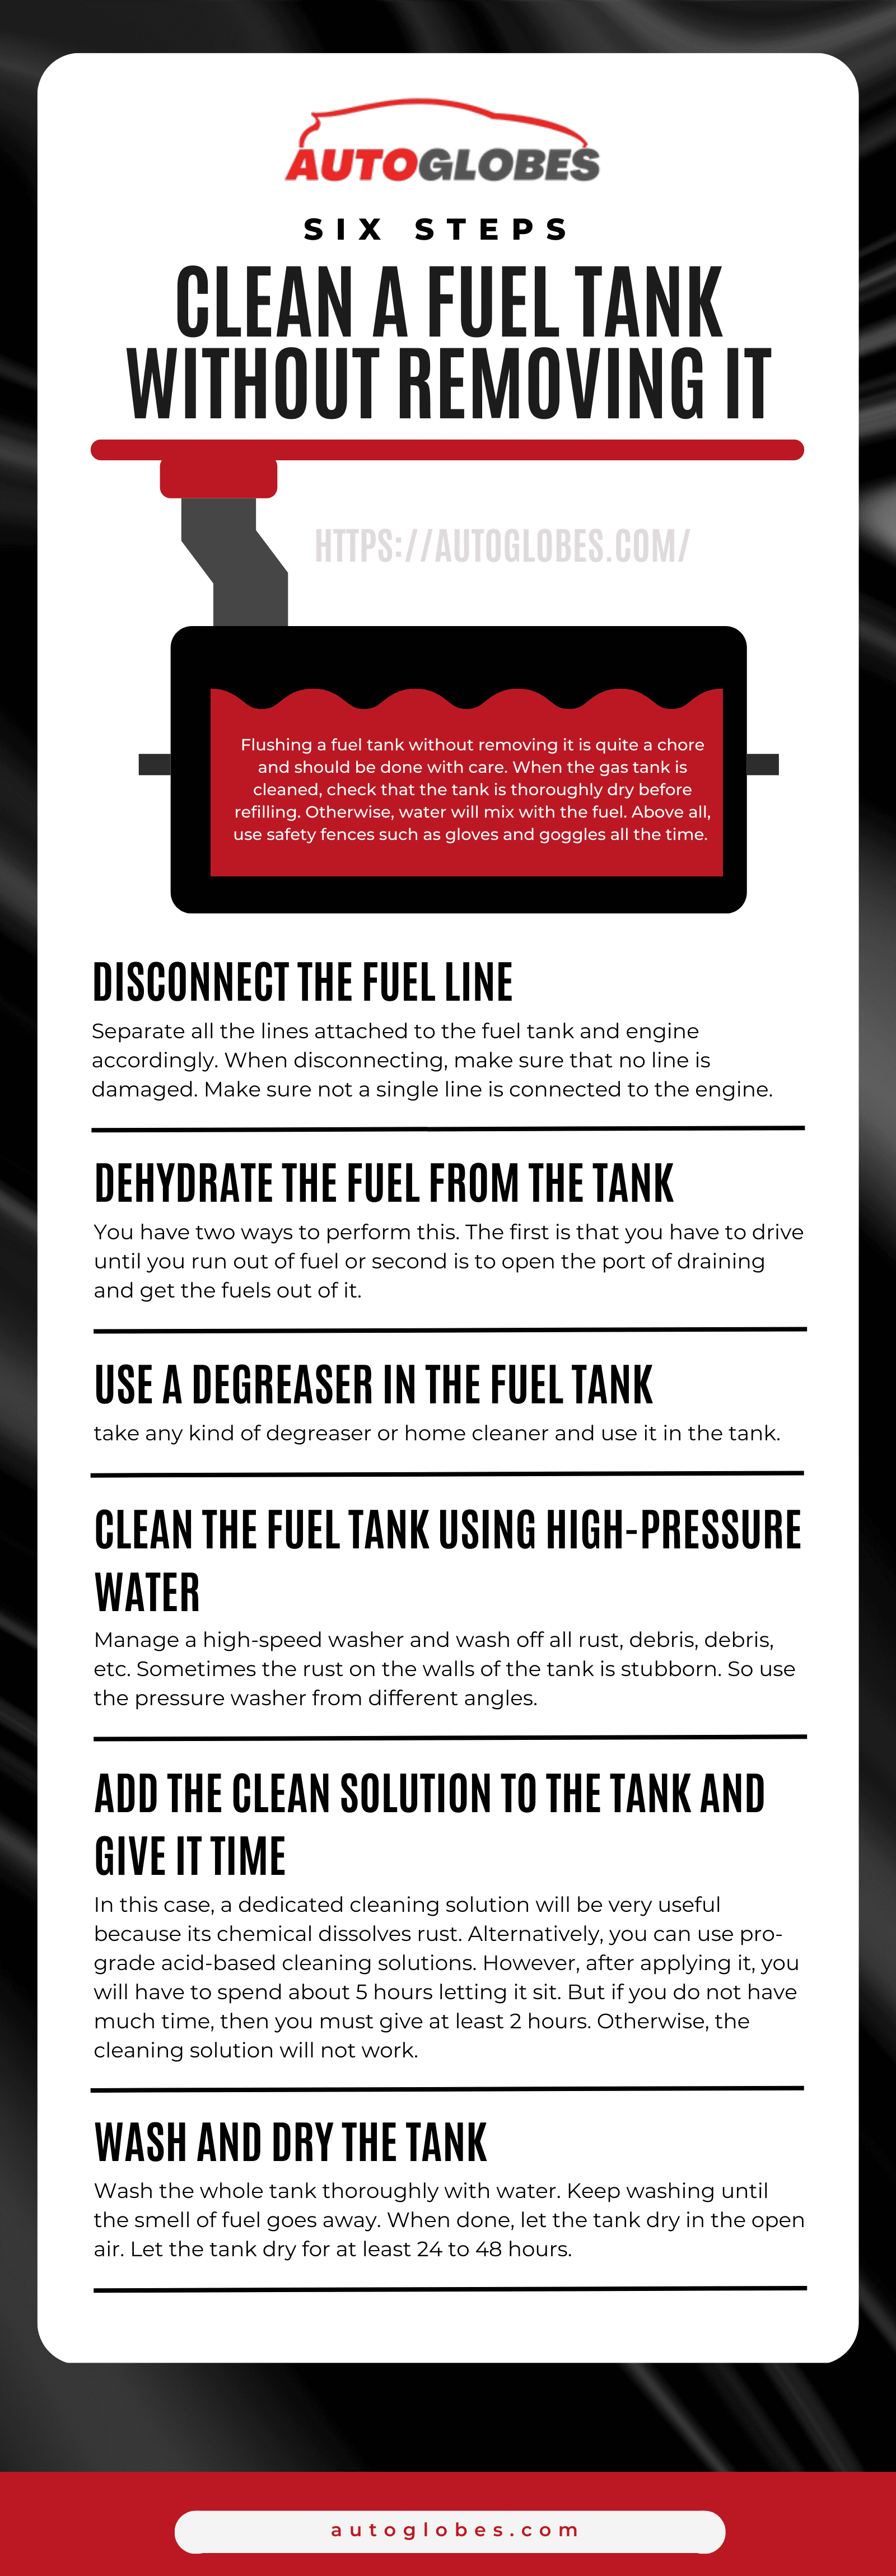 Clean a Fuel Tank Without Removing It Infographic